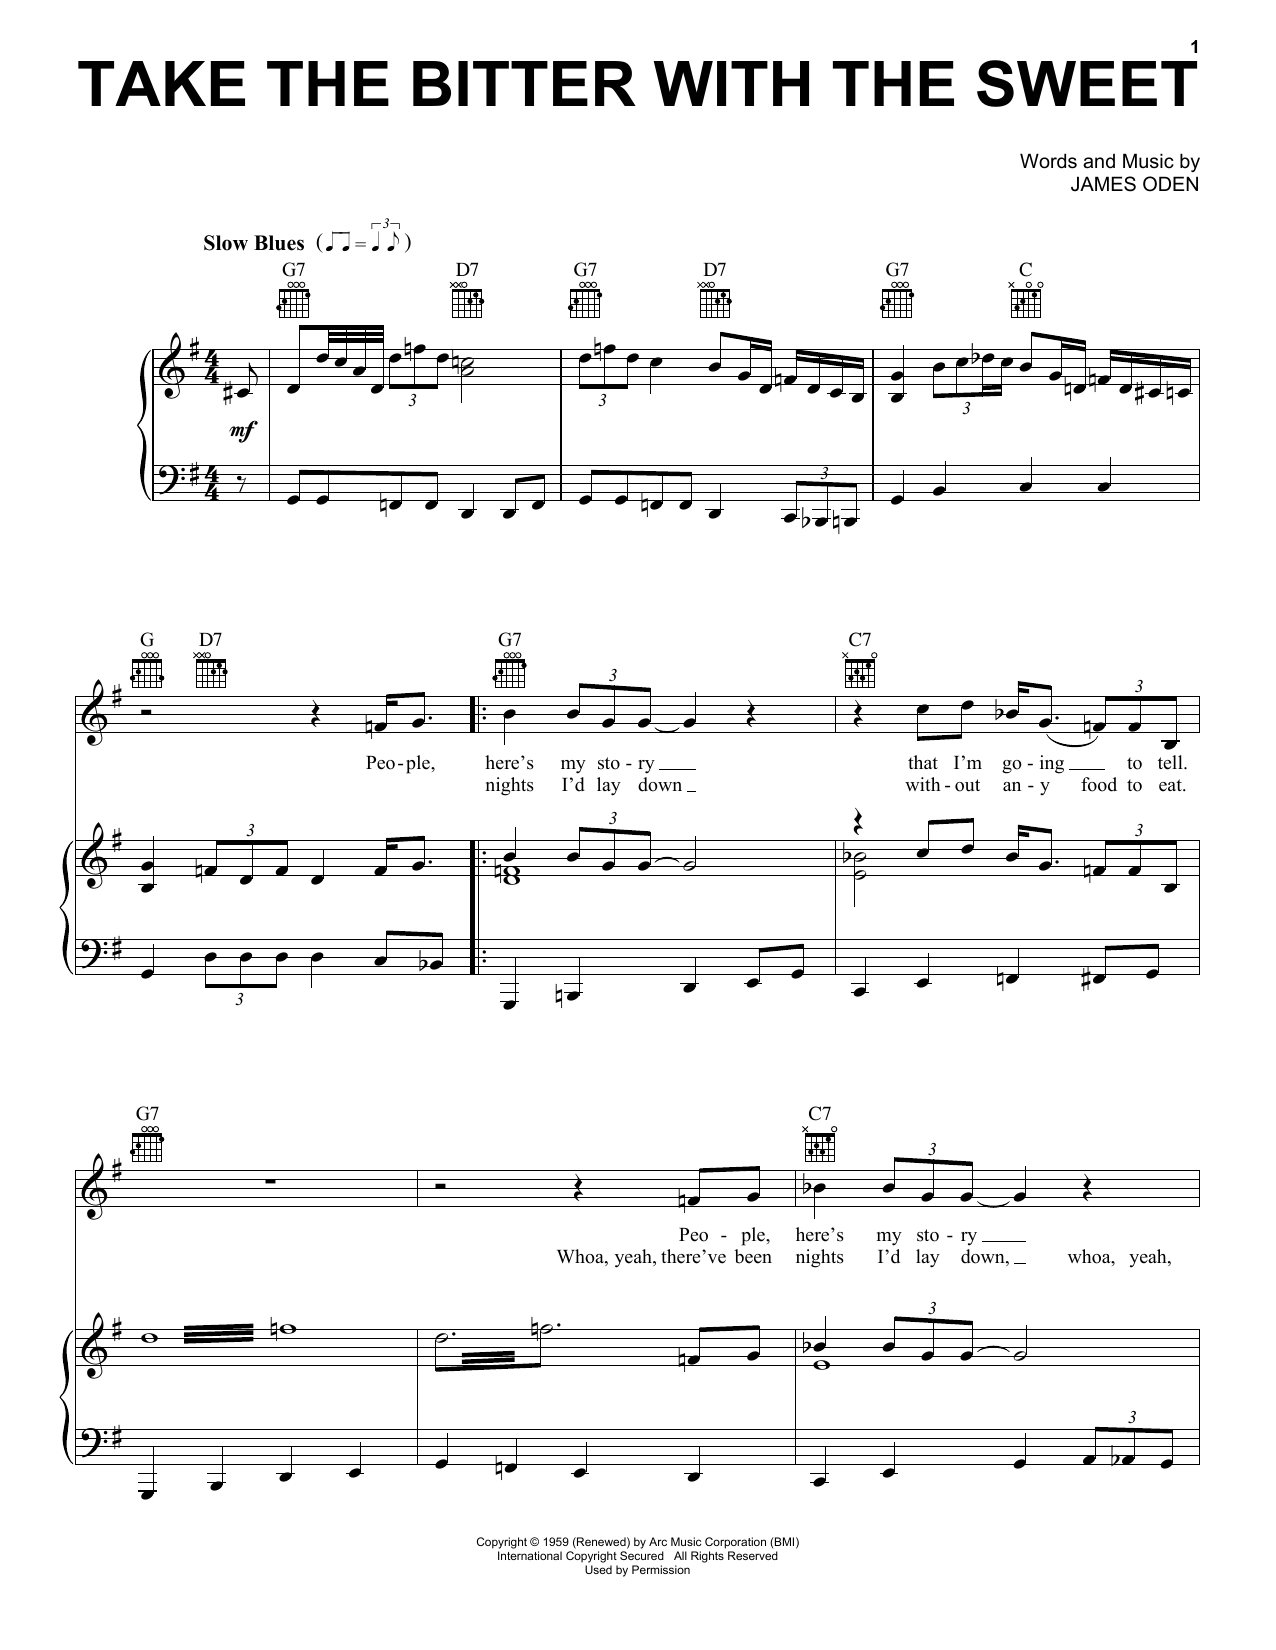 Muddy Waters Take The Bitter With The Sweet sheet music notes printable PDF score